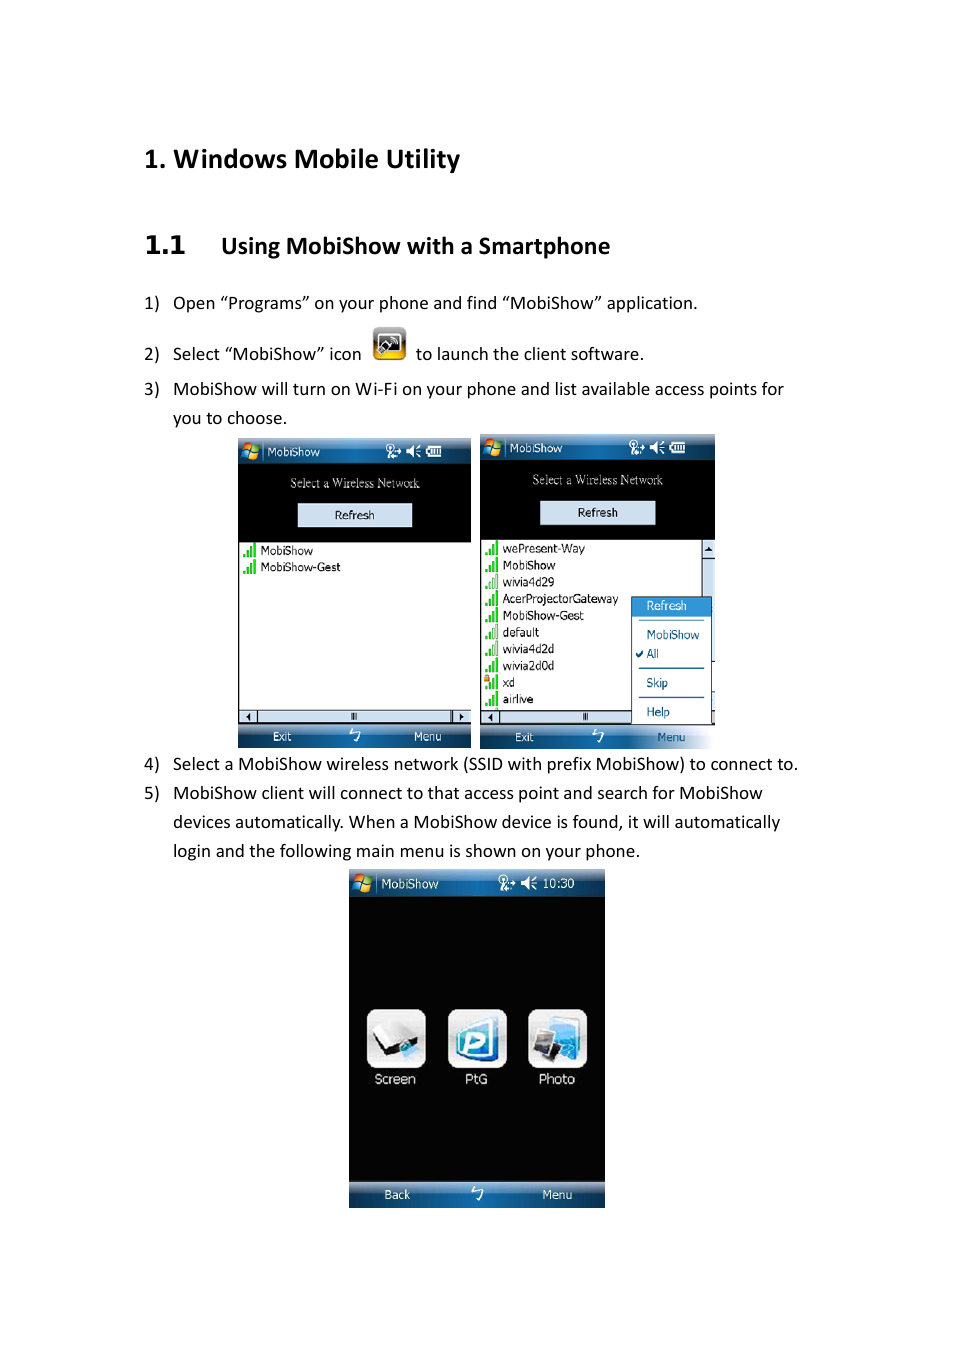 MobiShow User's Manual for Windows Mobile